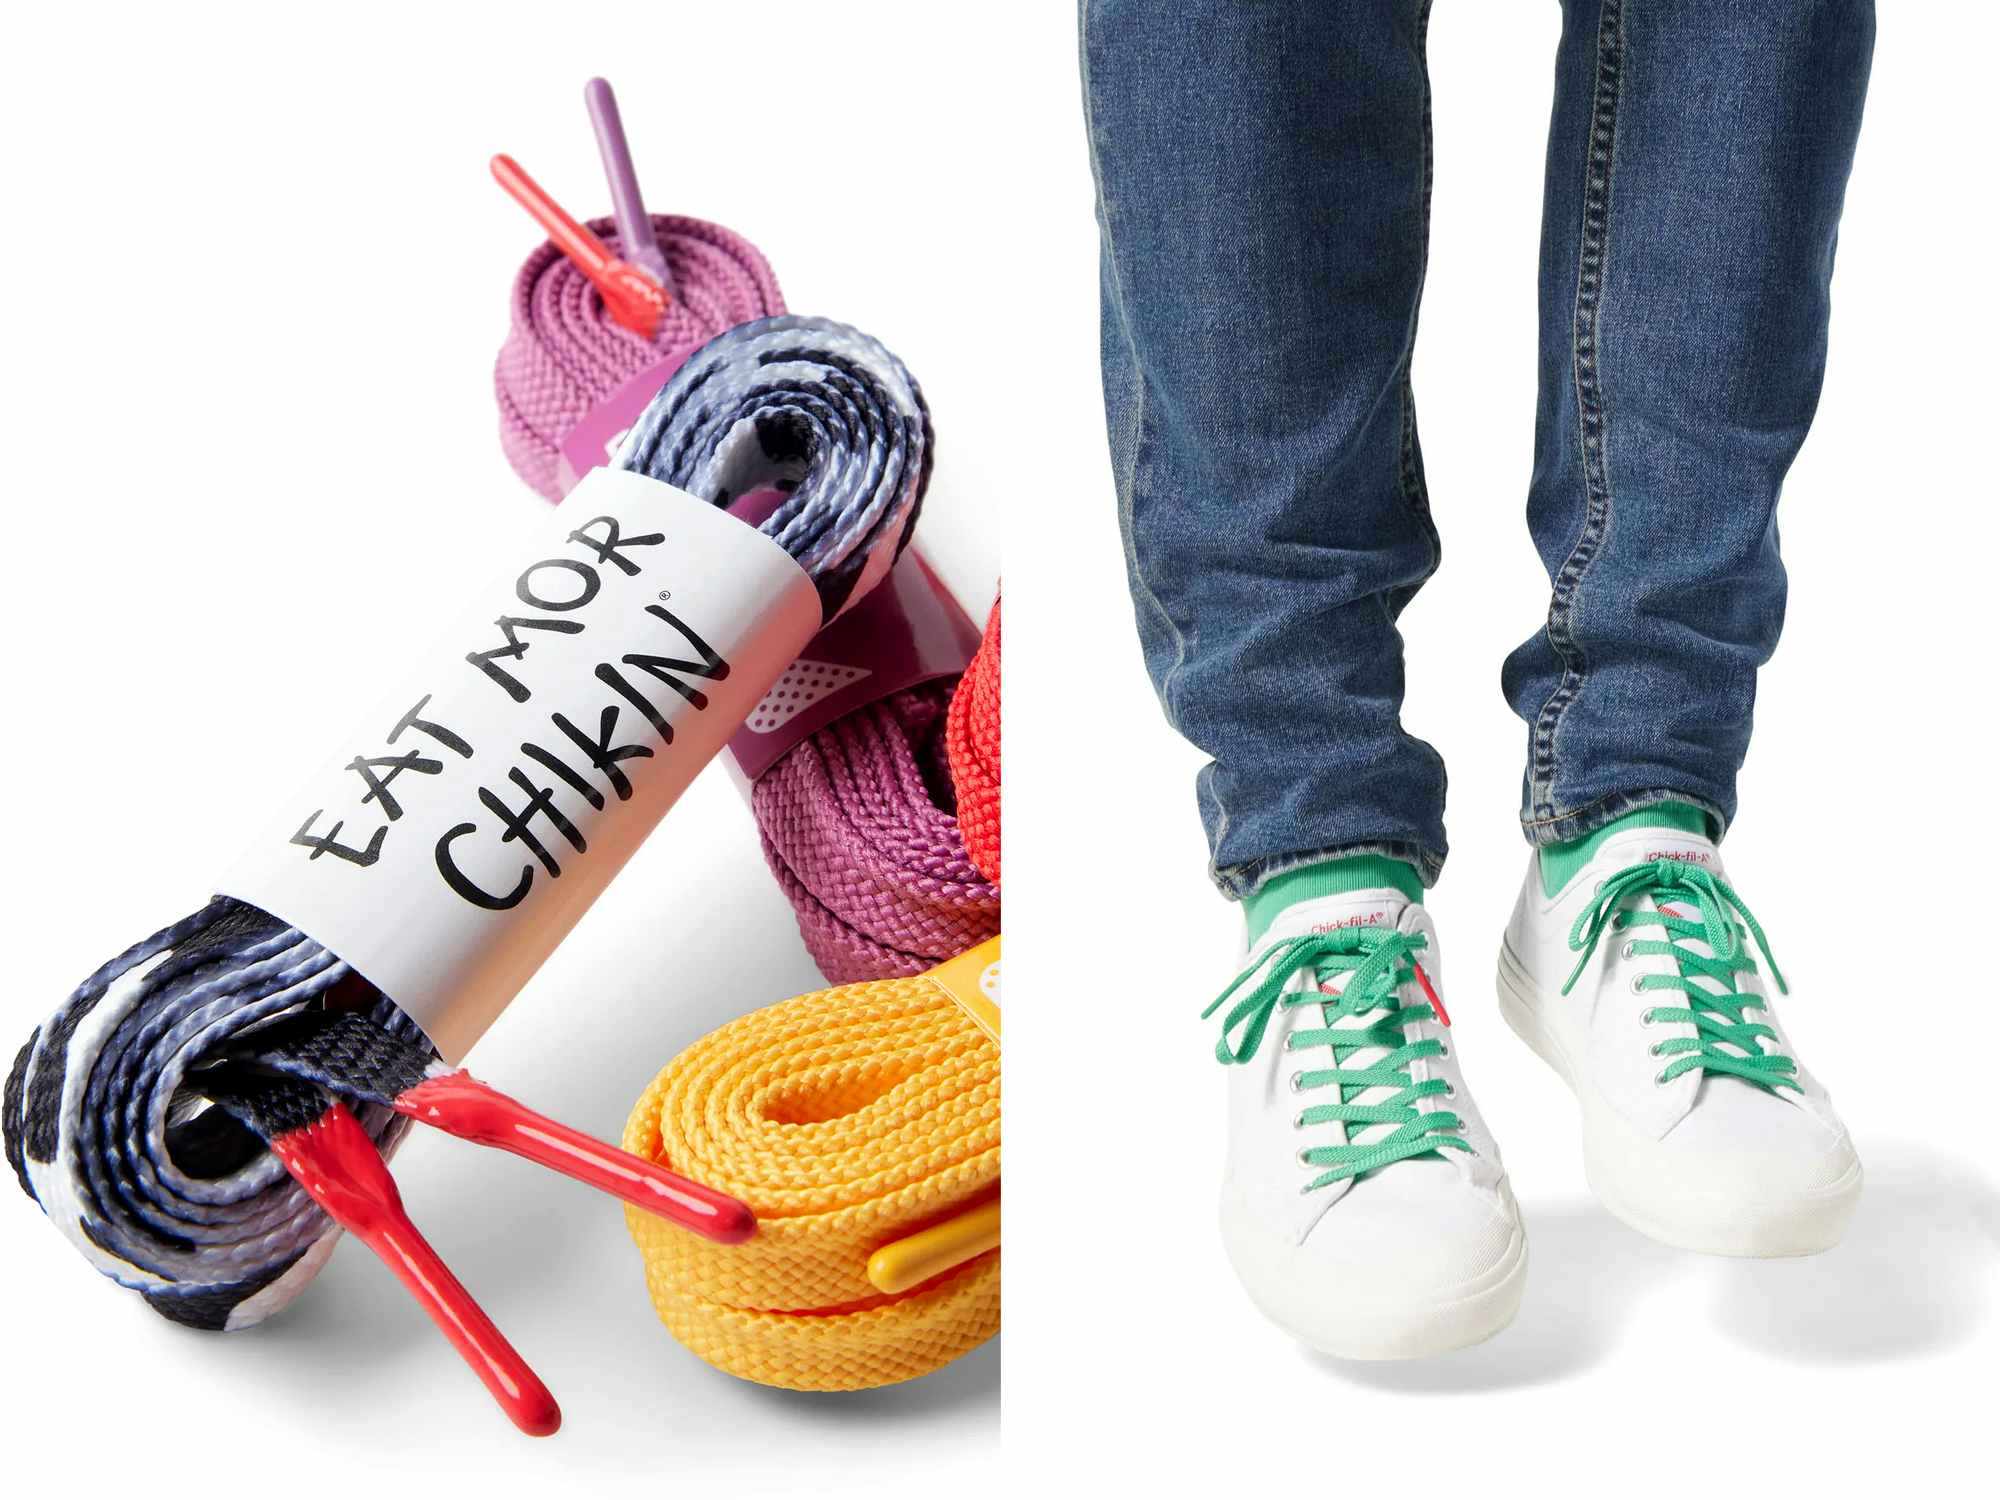 chick-fil-a sauce-inspired shoelaces